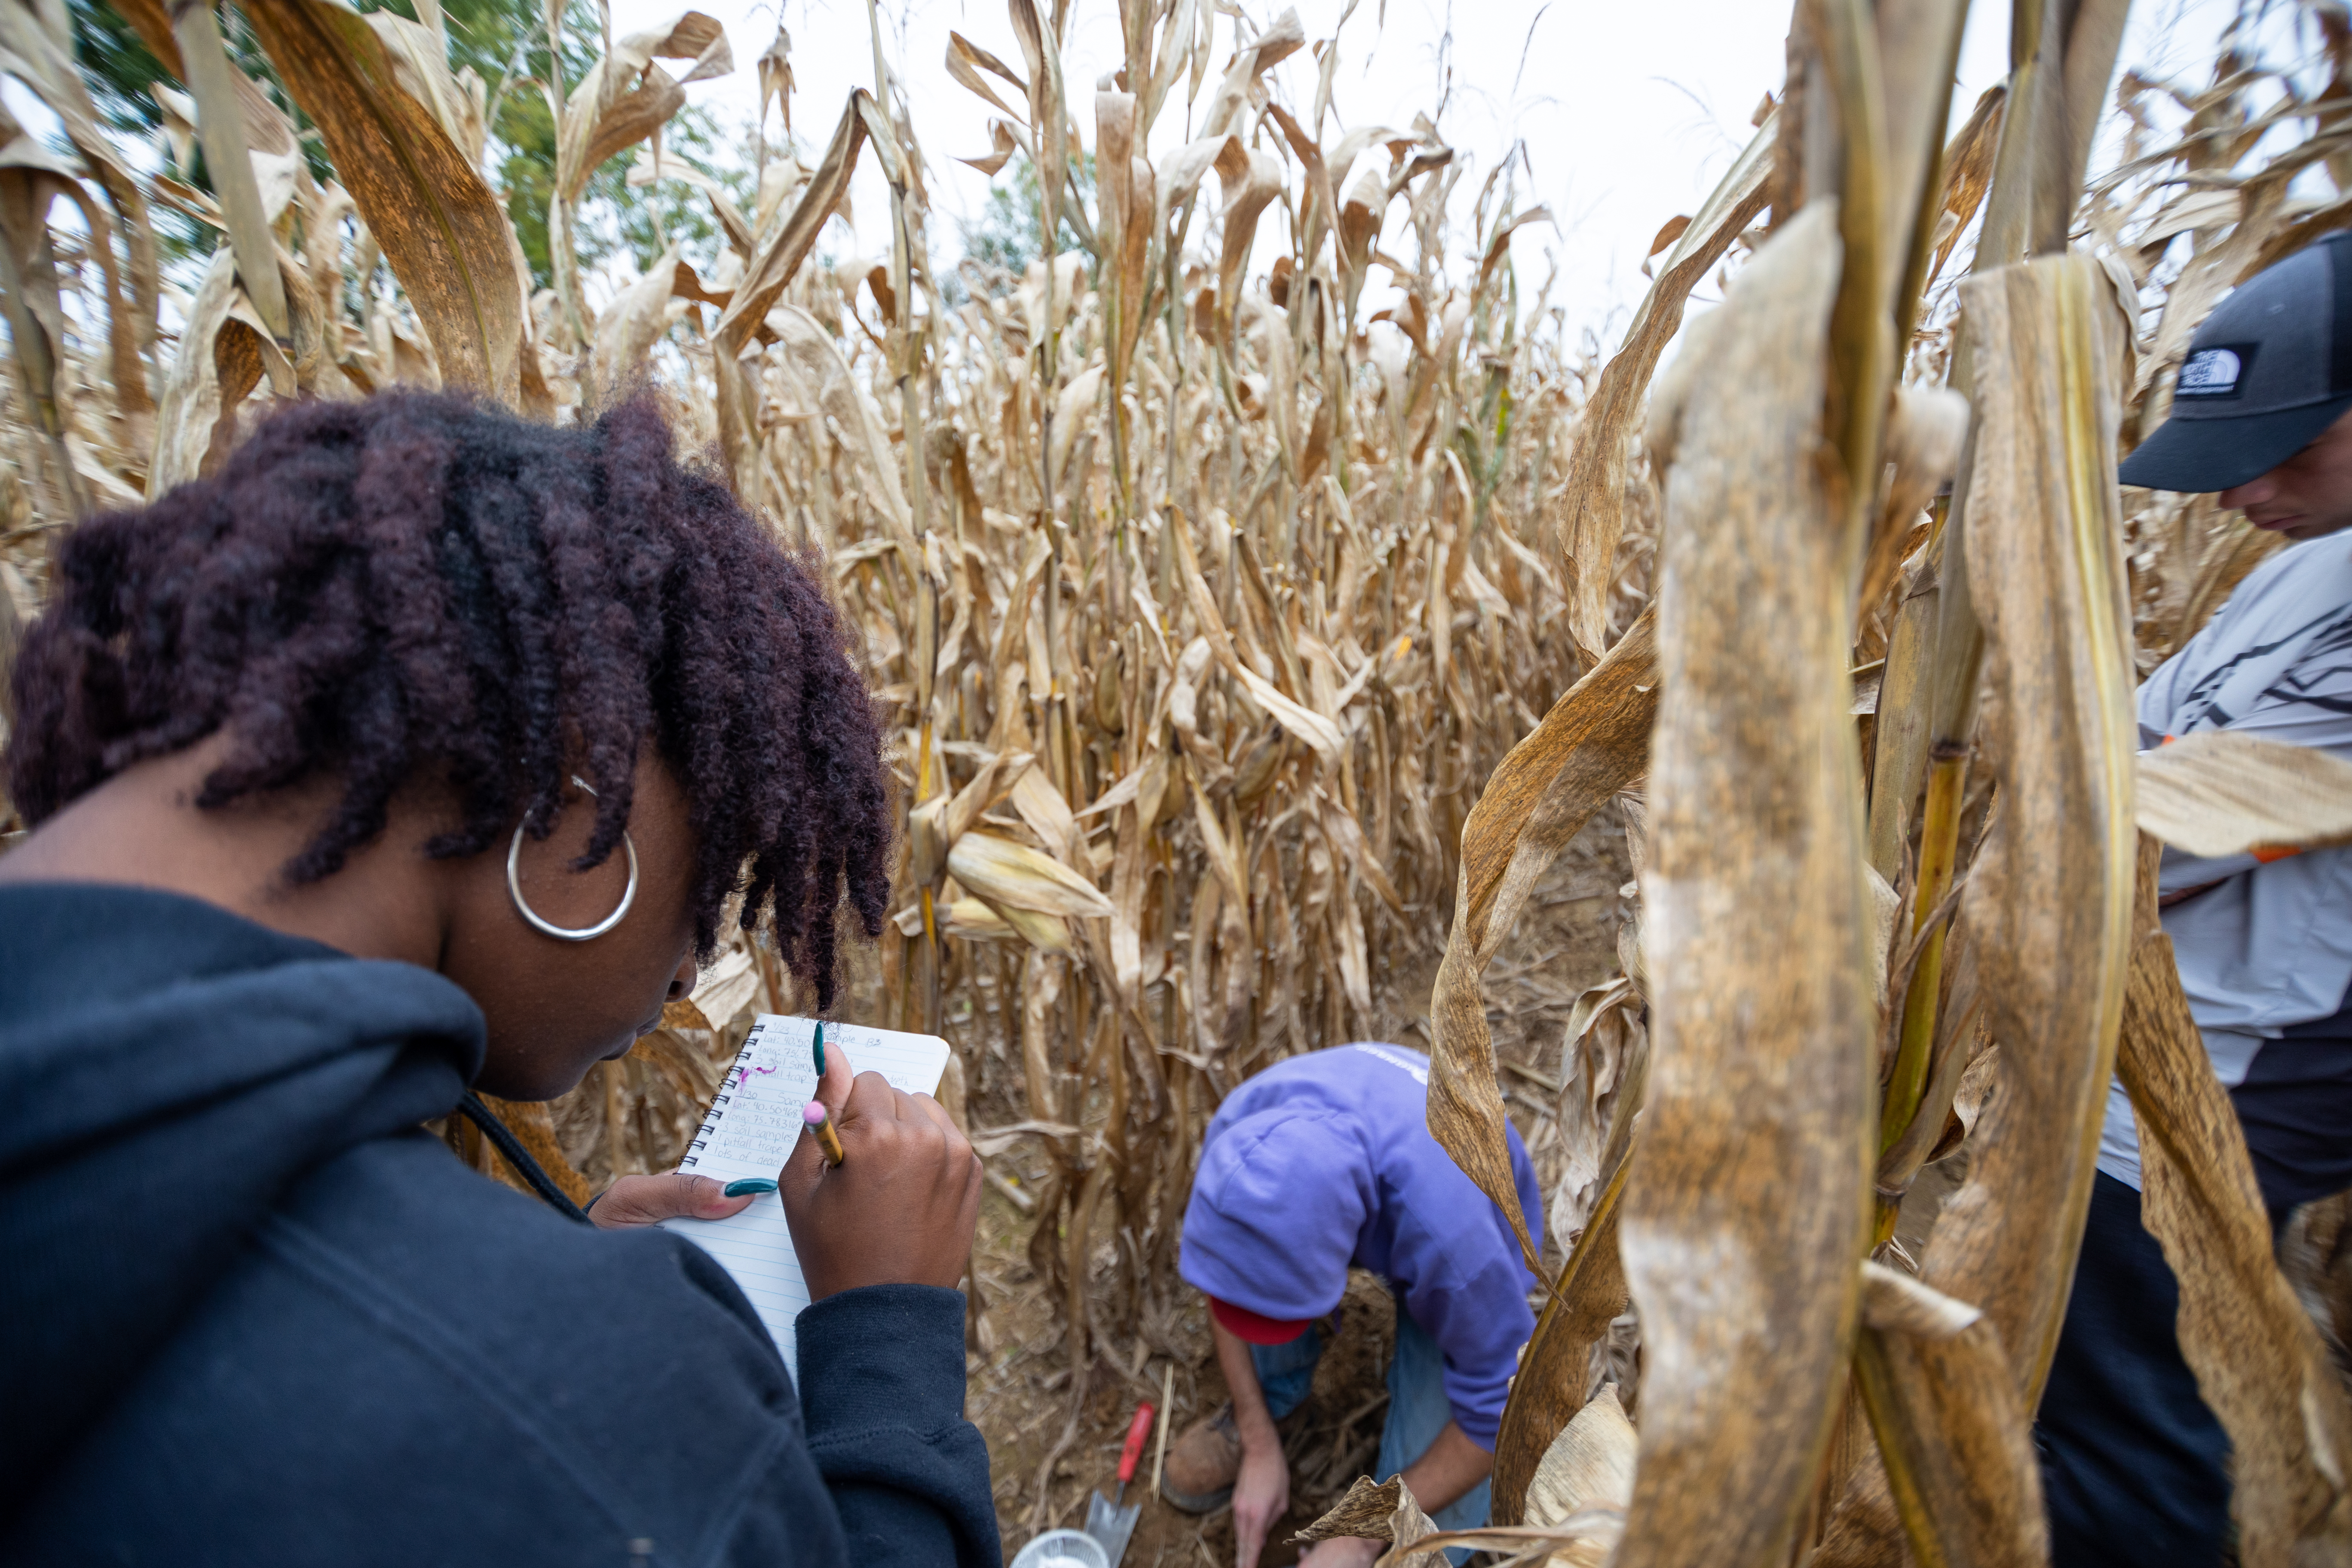 Students taking field notes in a cornfield.